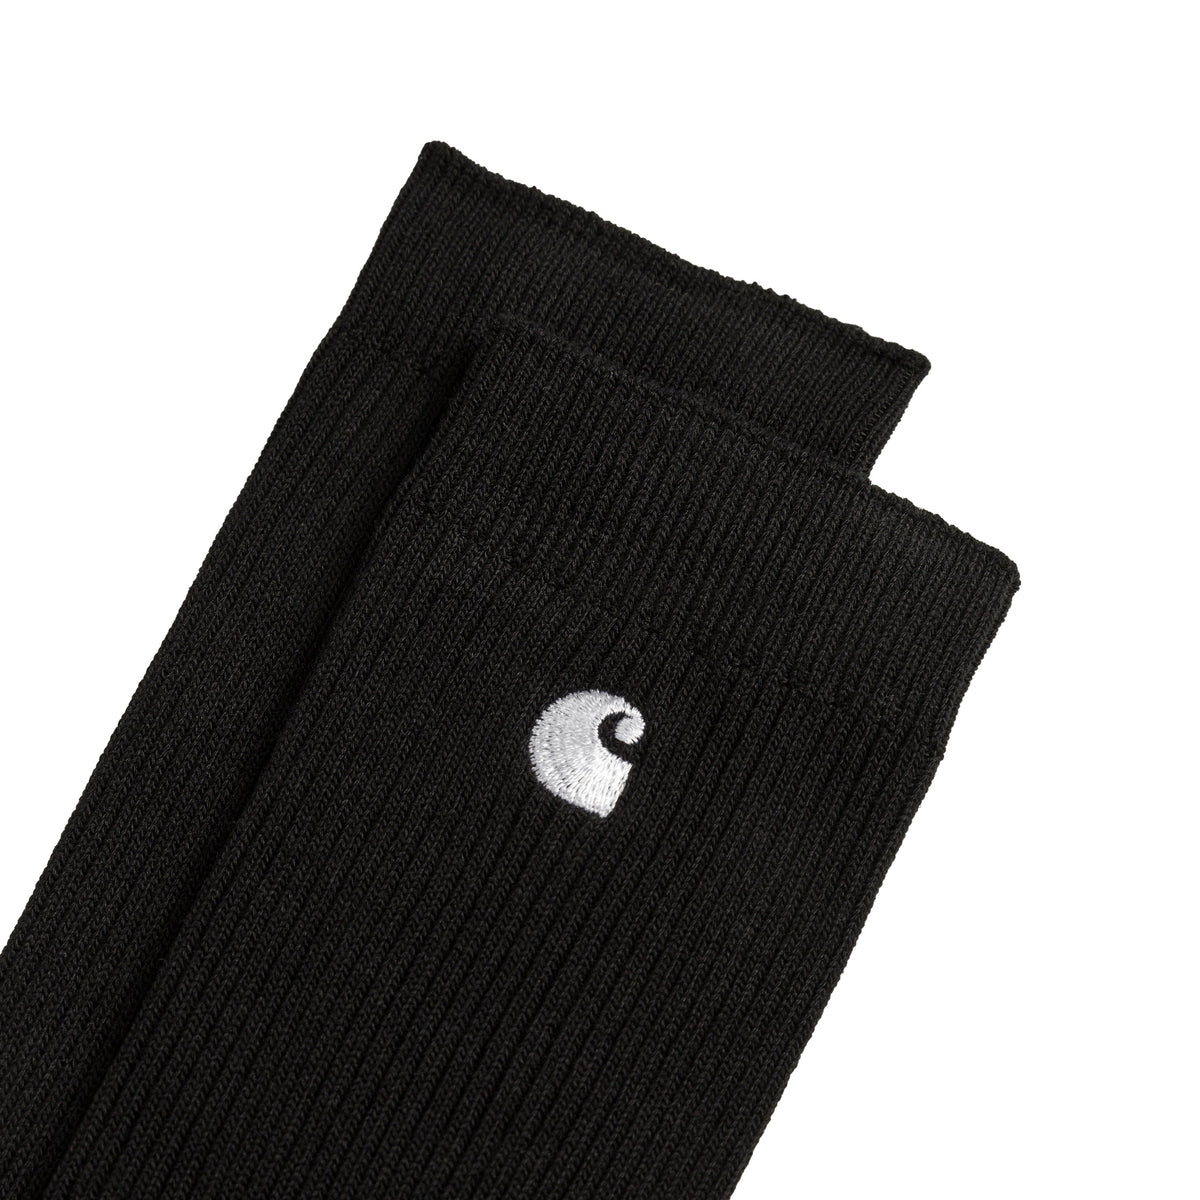 Carhartt WIP Madison Pack Socks – buy now at Asphaltgold Online Store!